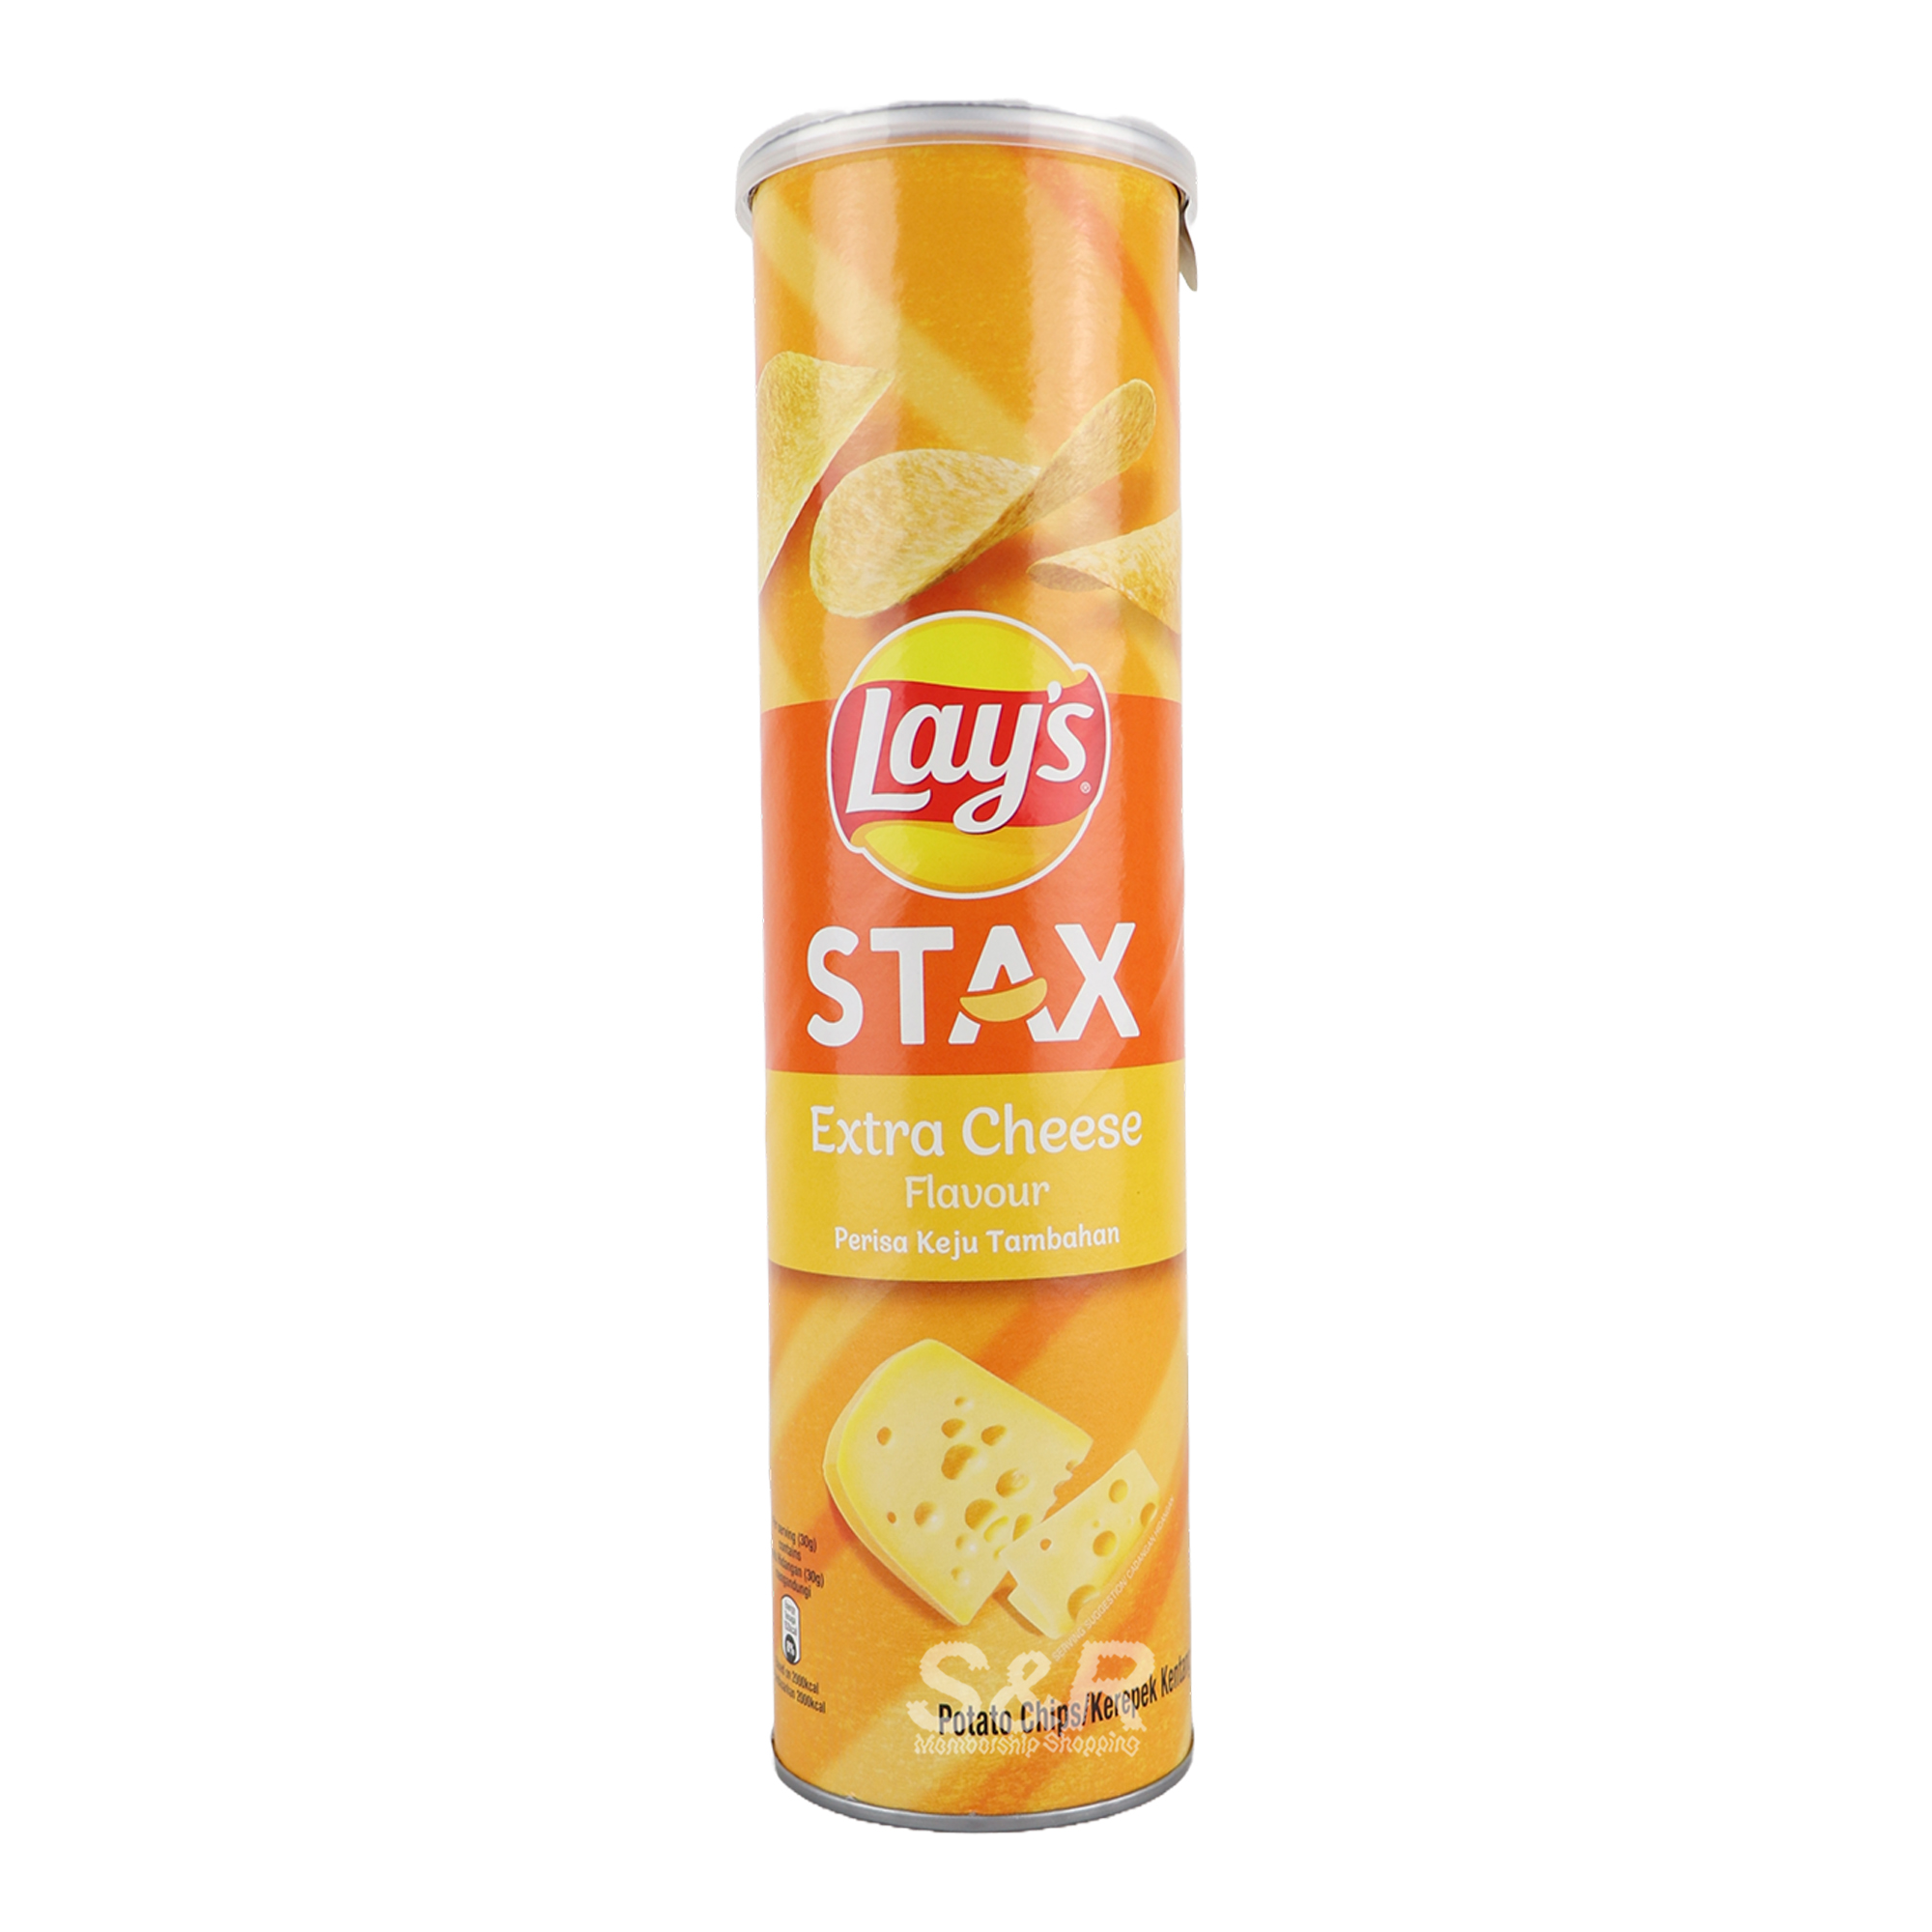 Lays Stax Extra Cheese Flavor 135g